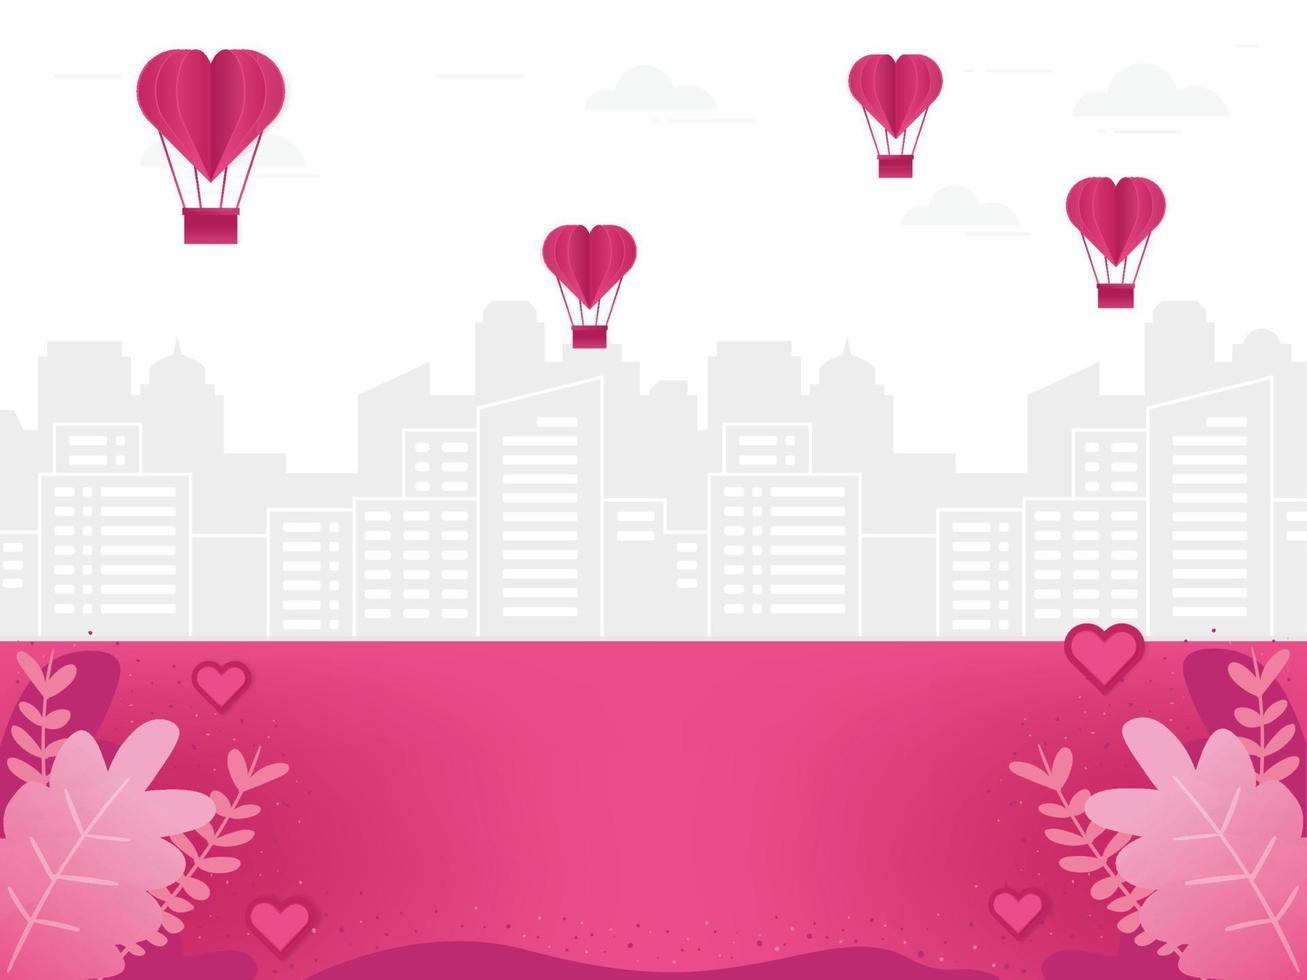 Love and romance background vector